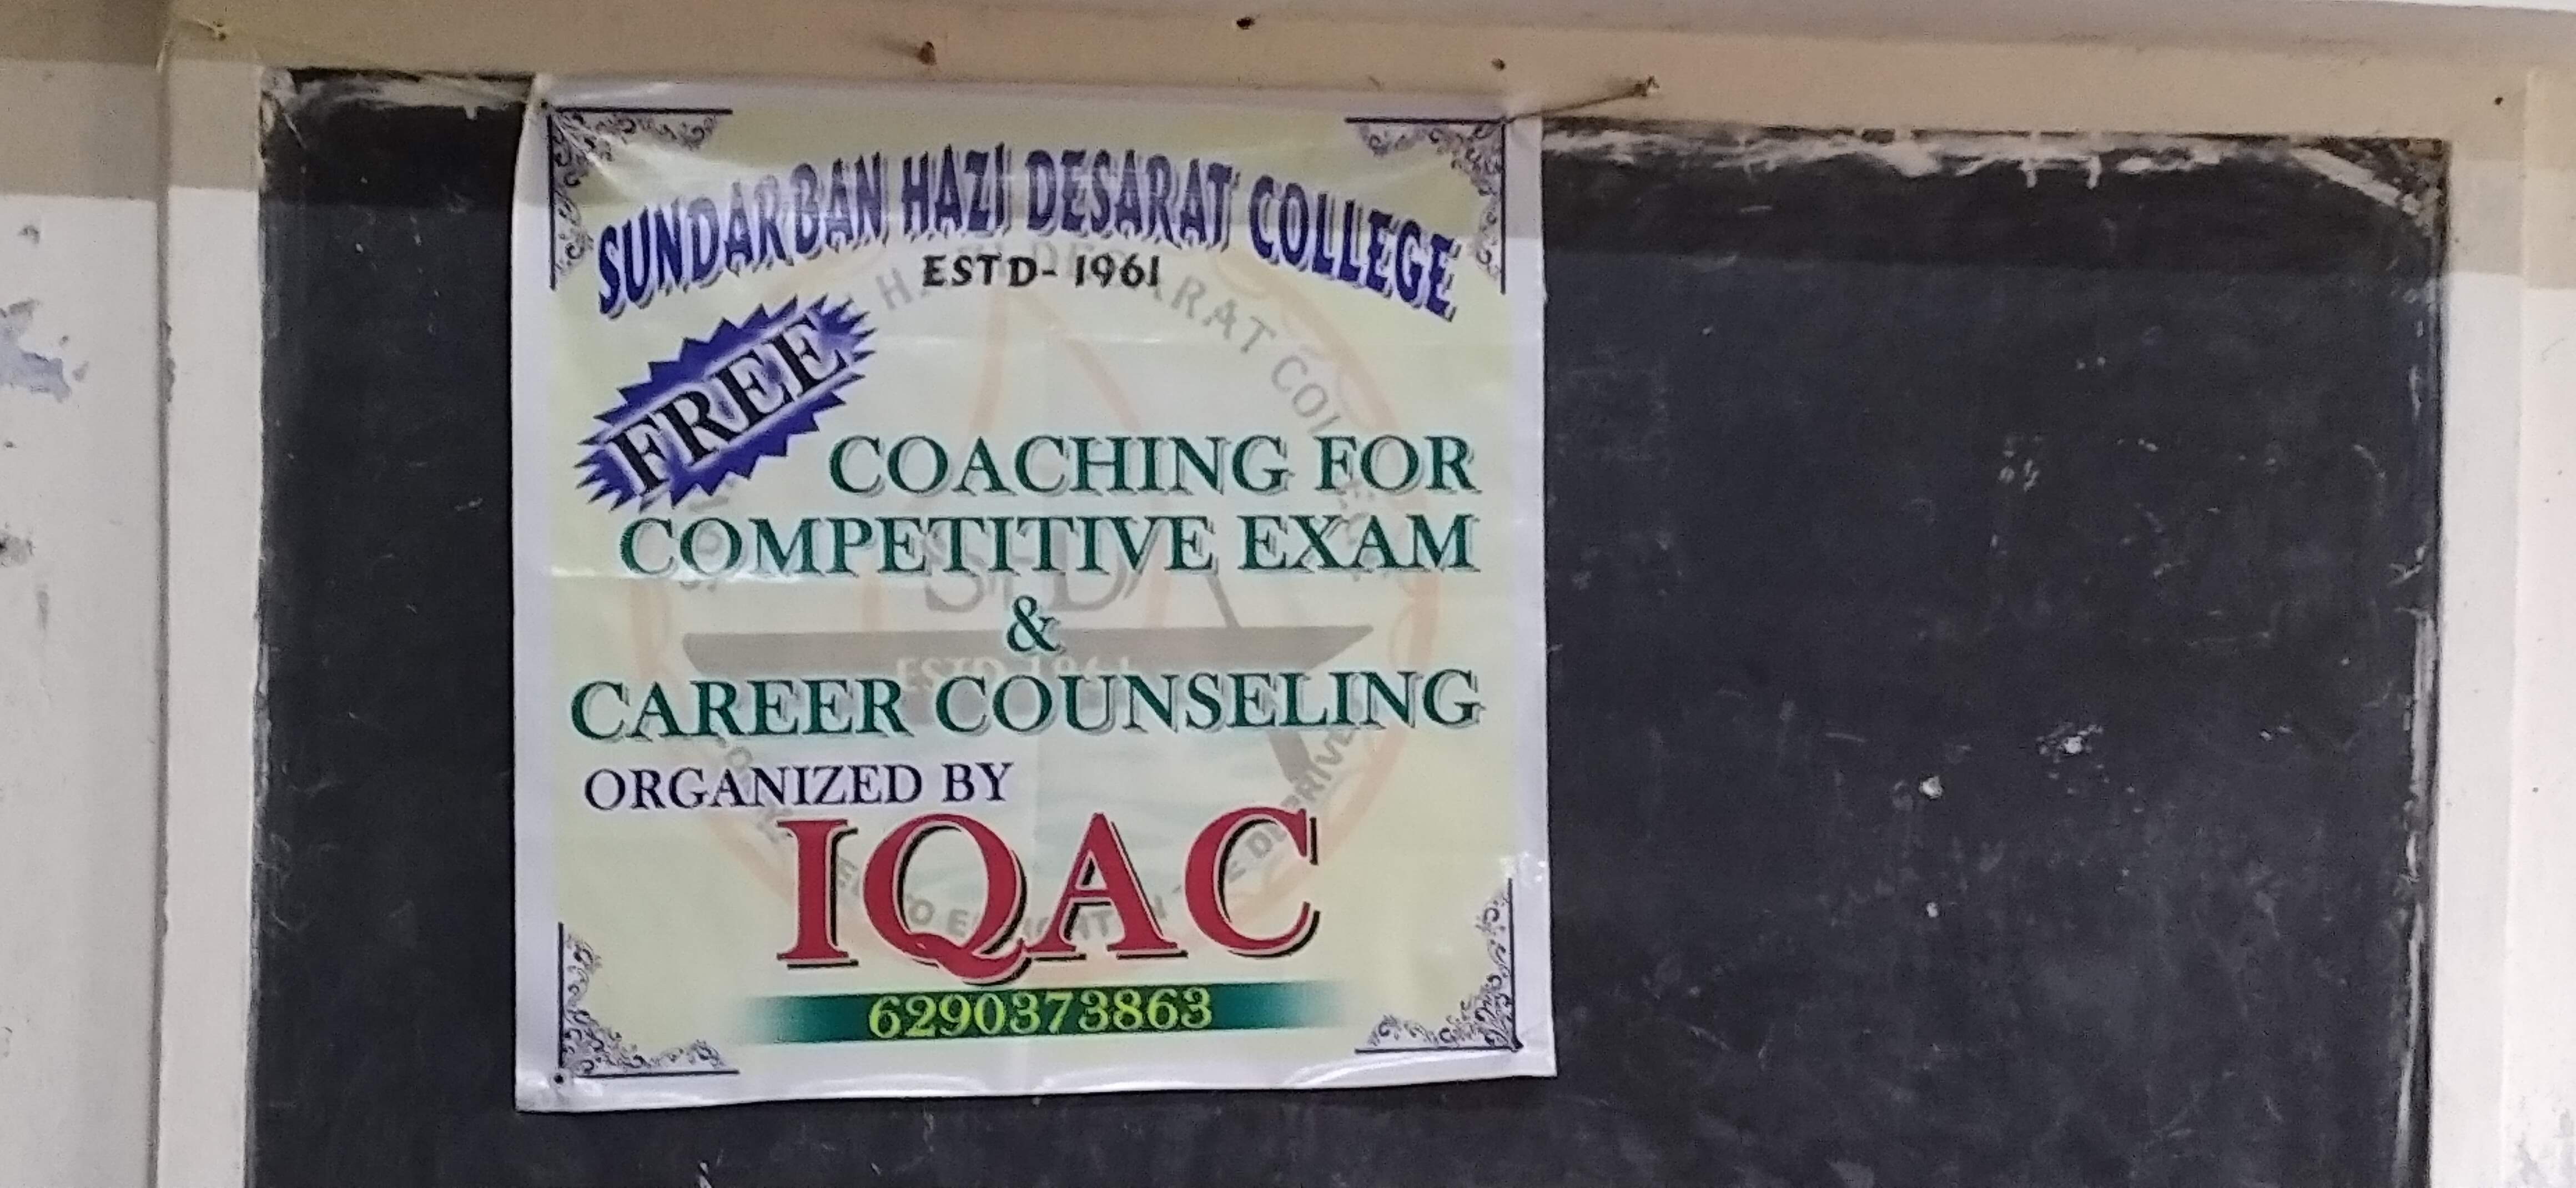 Dept. of Mathematics plays a major role to run coaching center for competitive examinations.